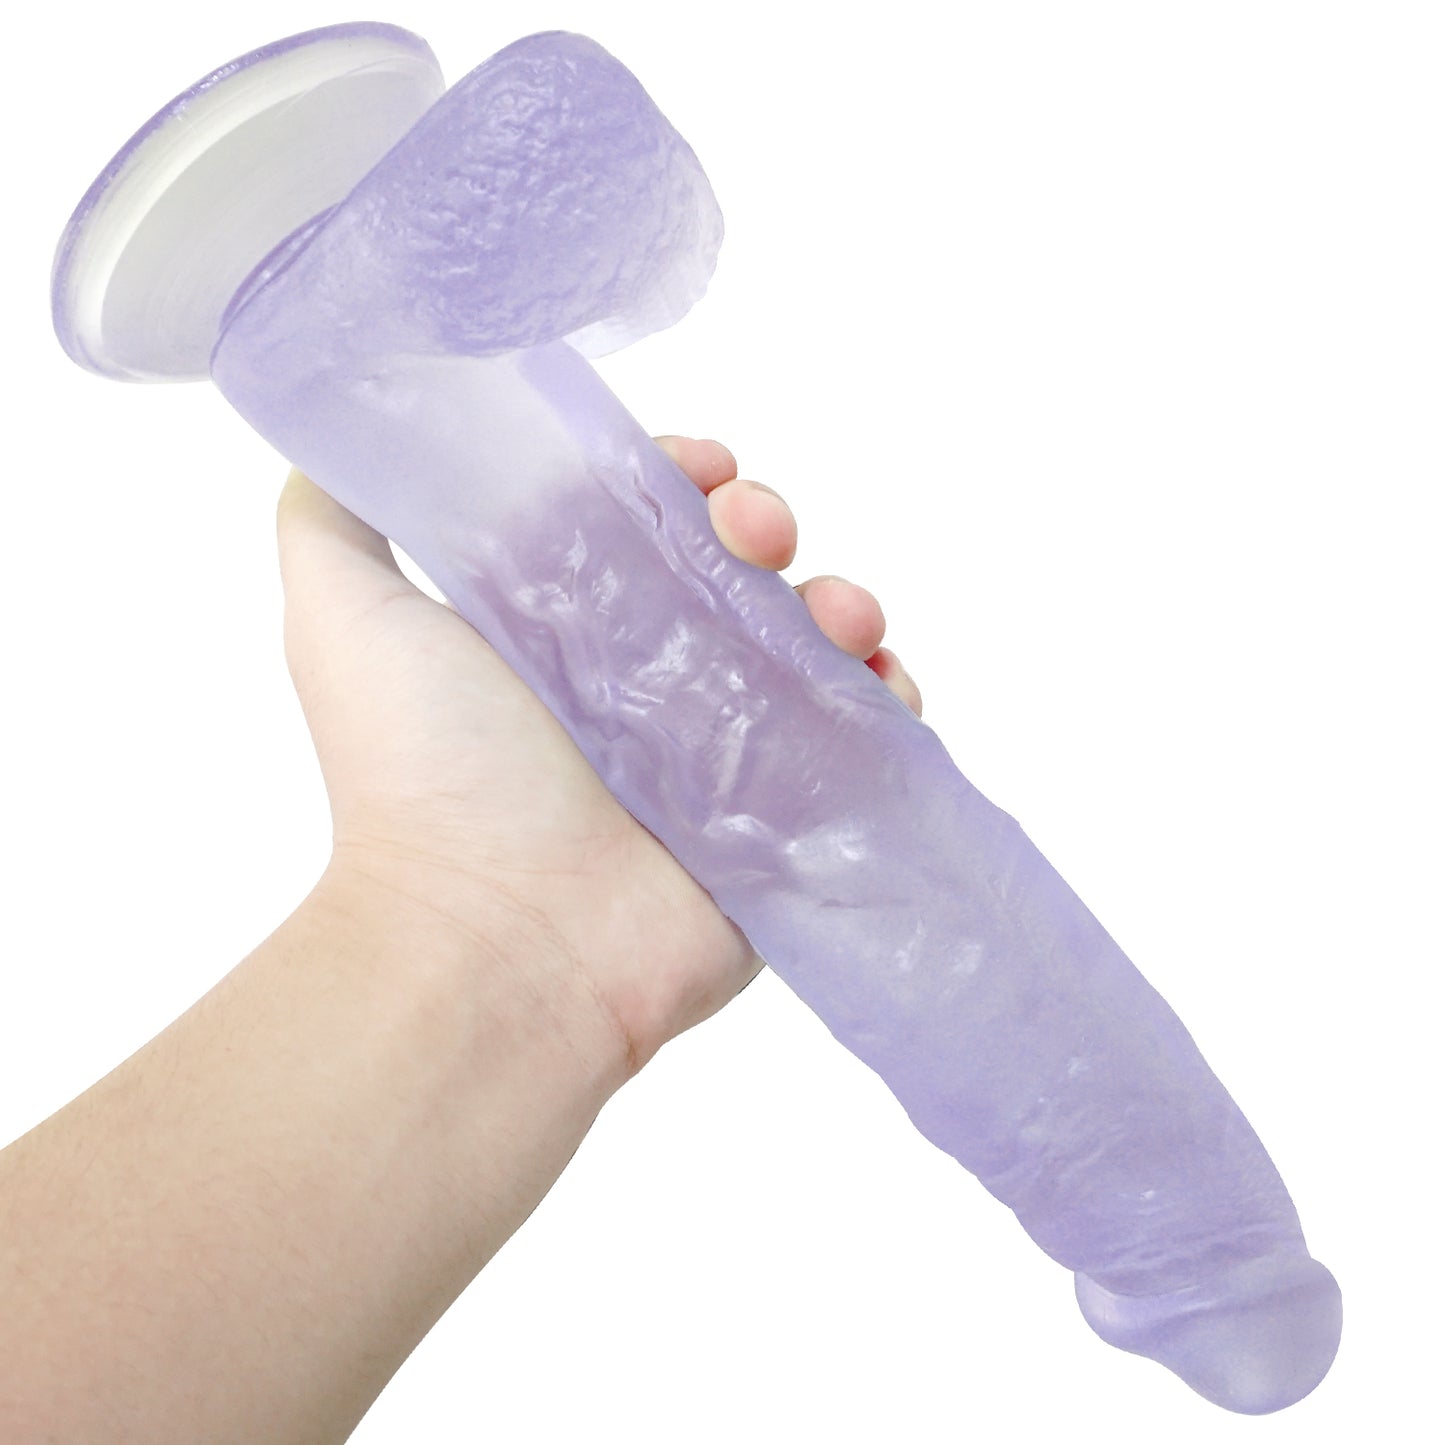 11 Inch Realistic Cock - Suction Cup Dildo